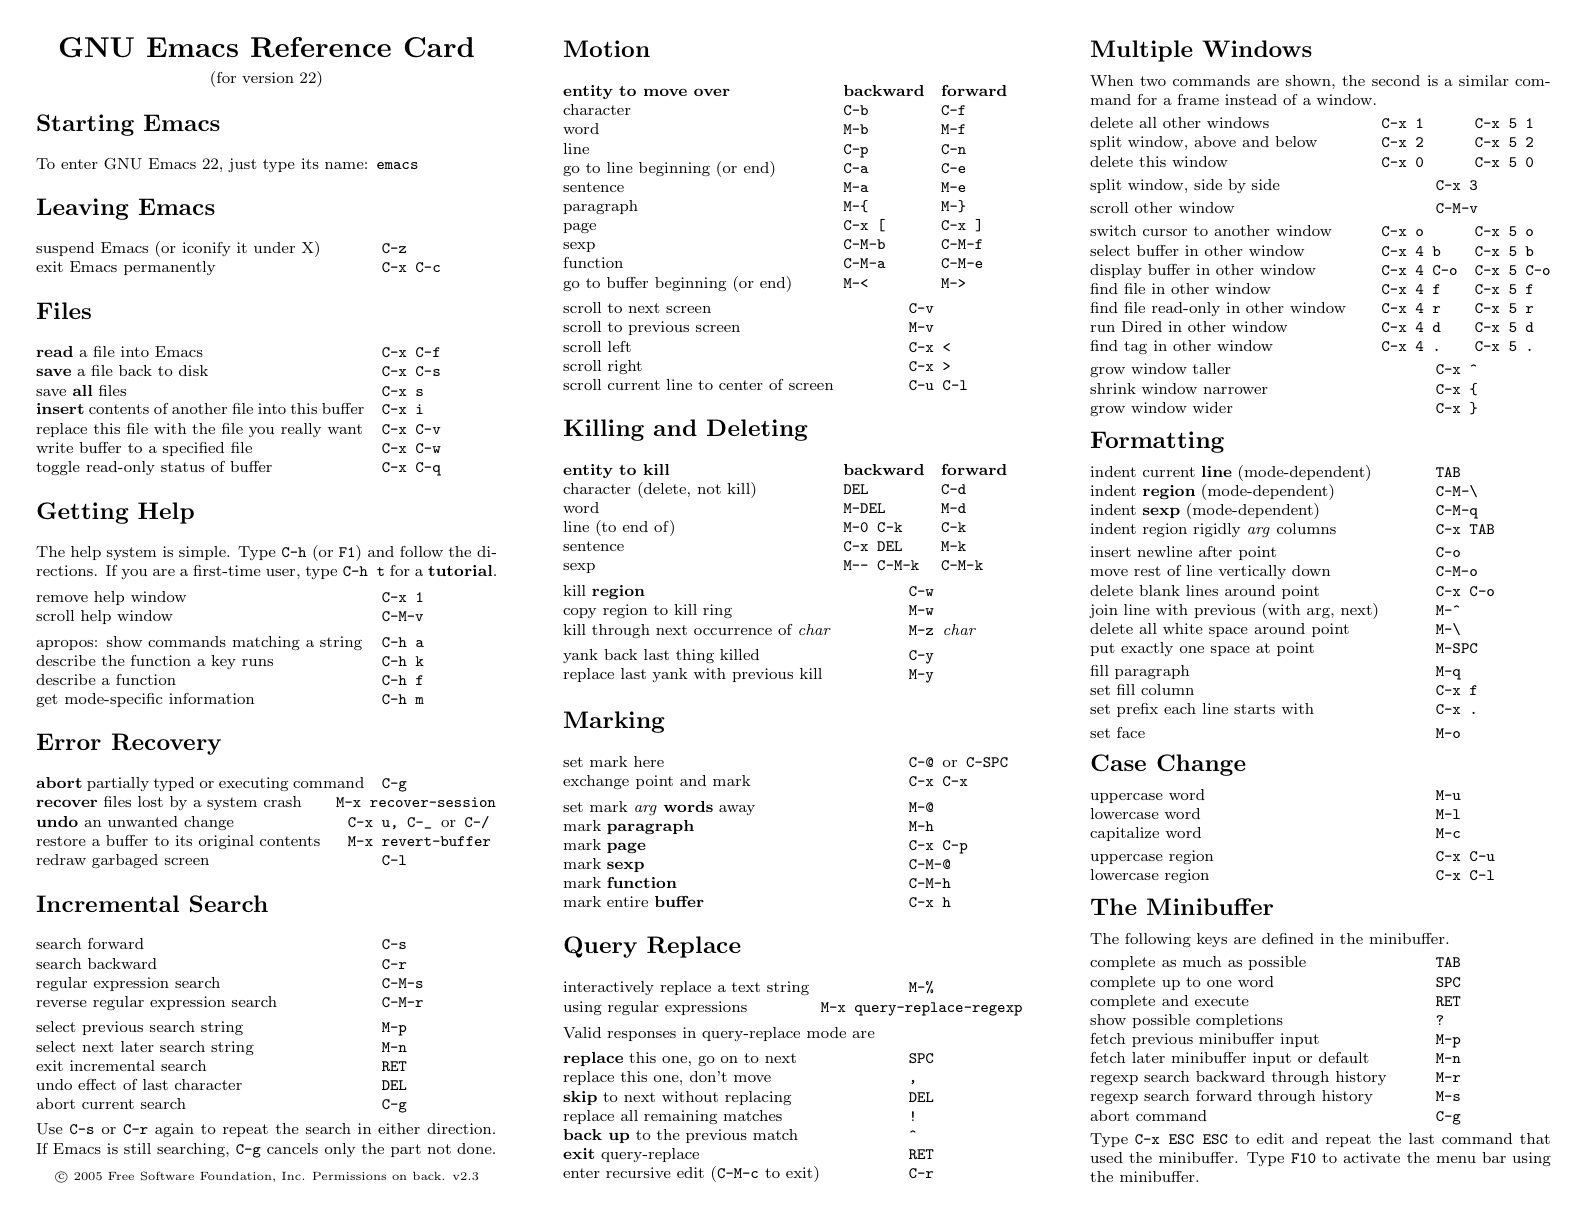 ./photo/GNU Emacs Reference Card-version22.png